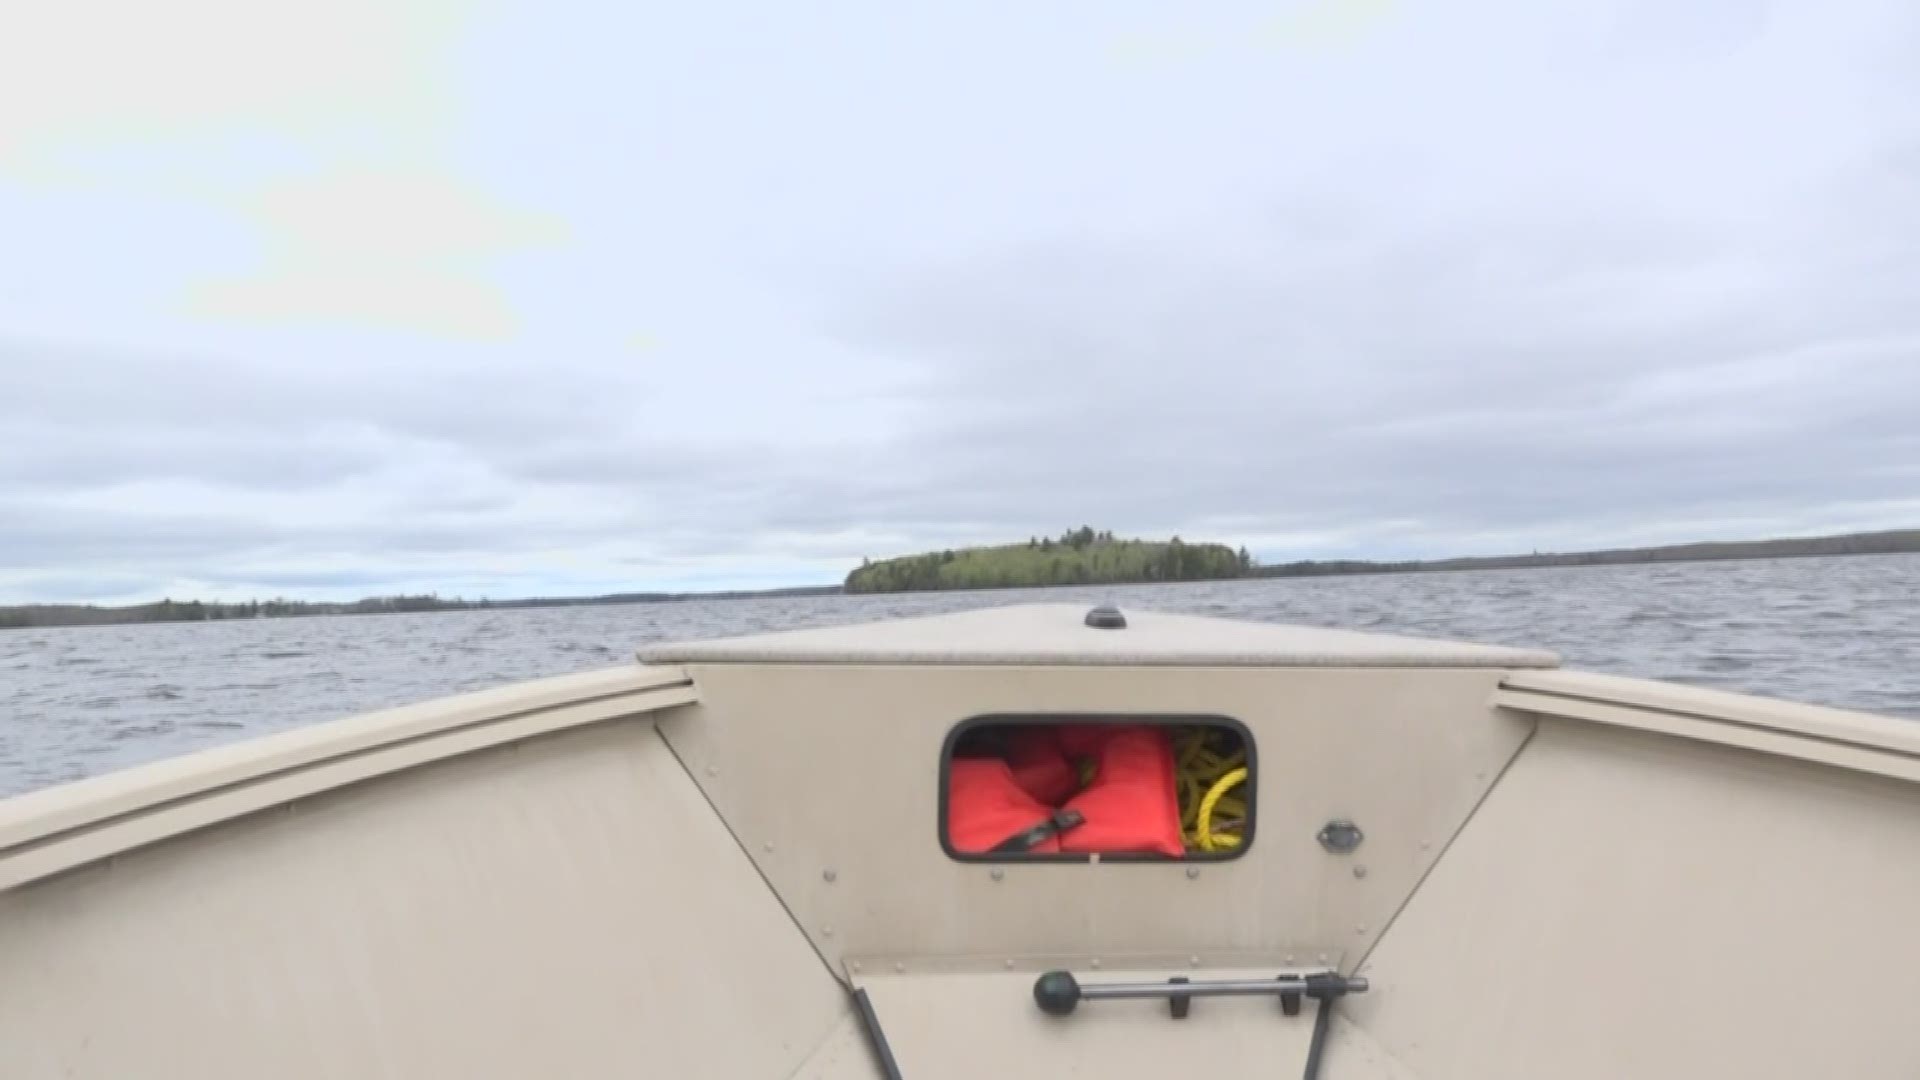 For National Safe Boating Week, Maine Game Wardens remind boaters ways to stay safe on the water.